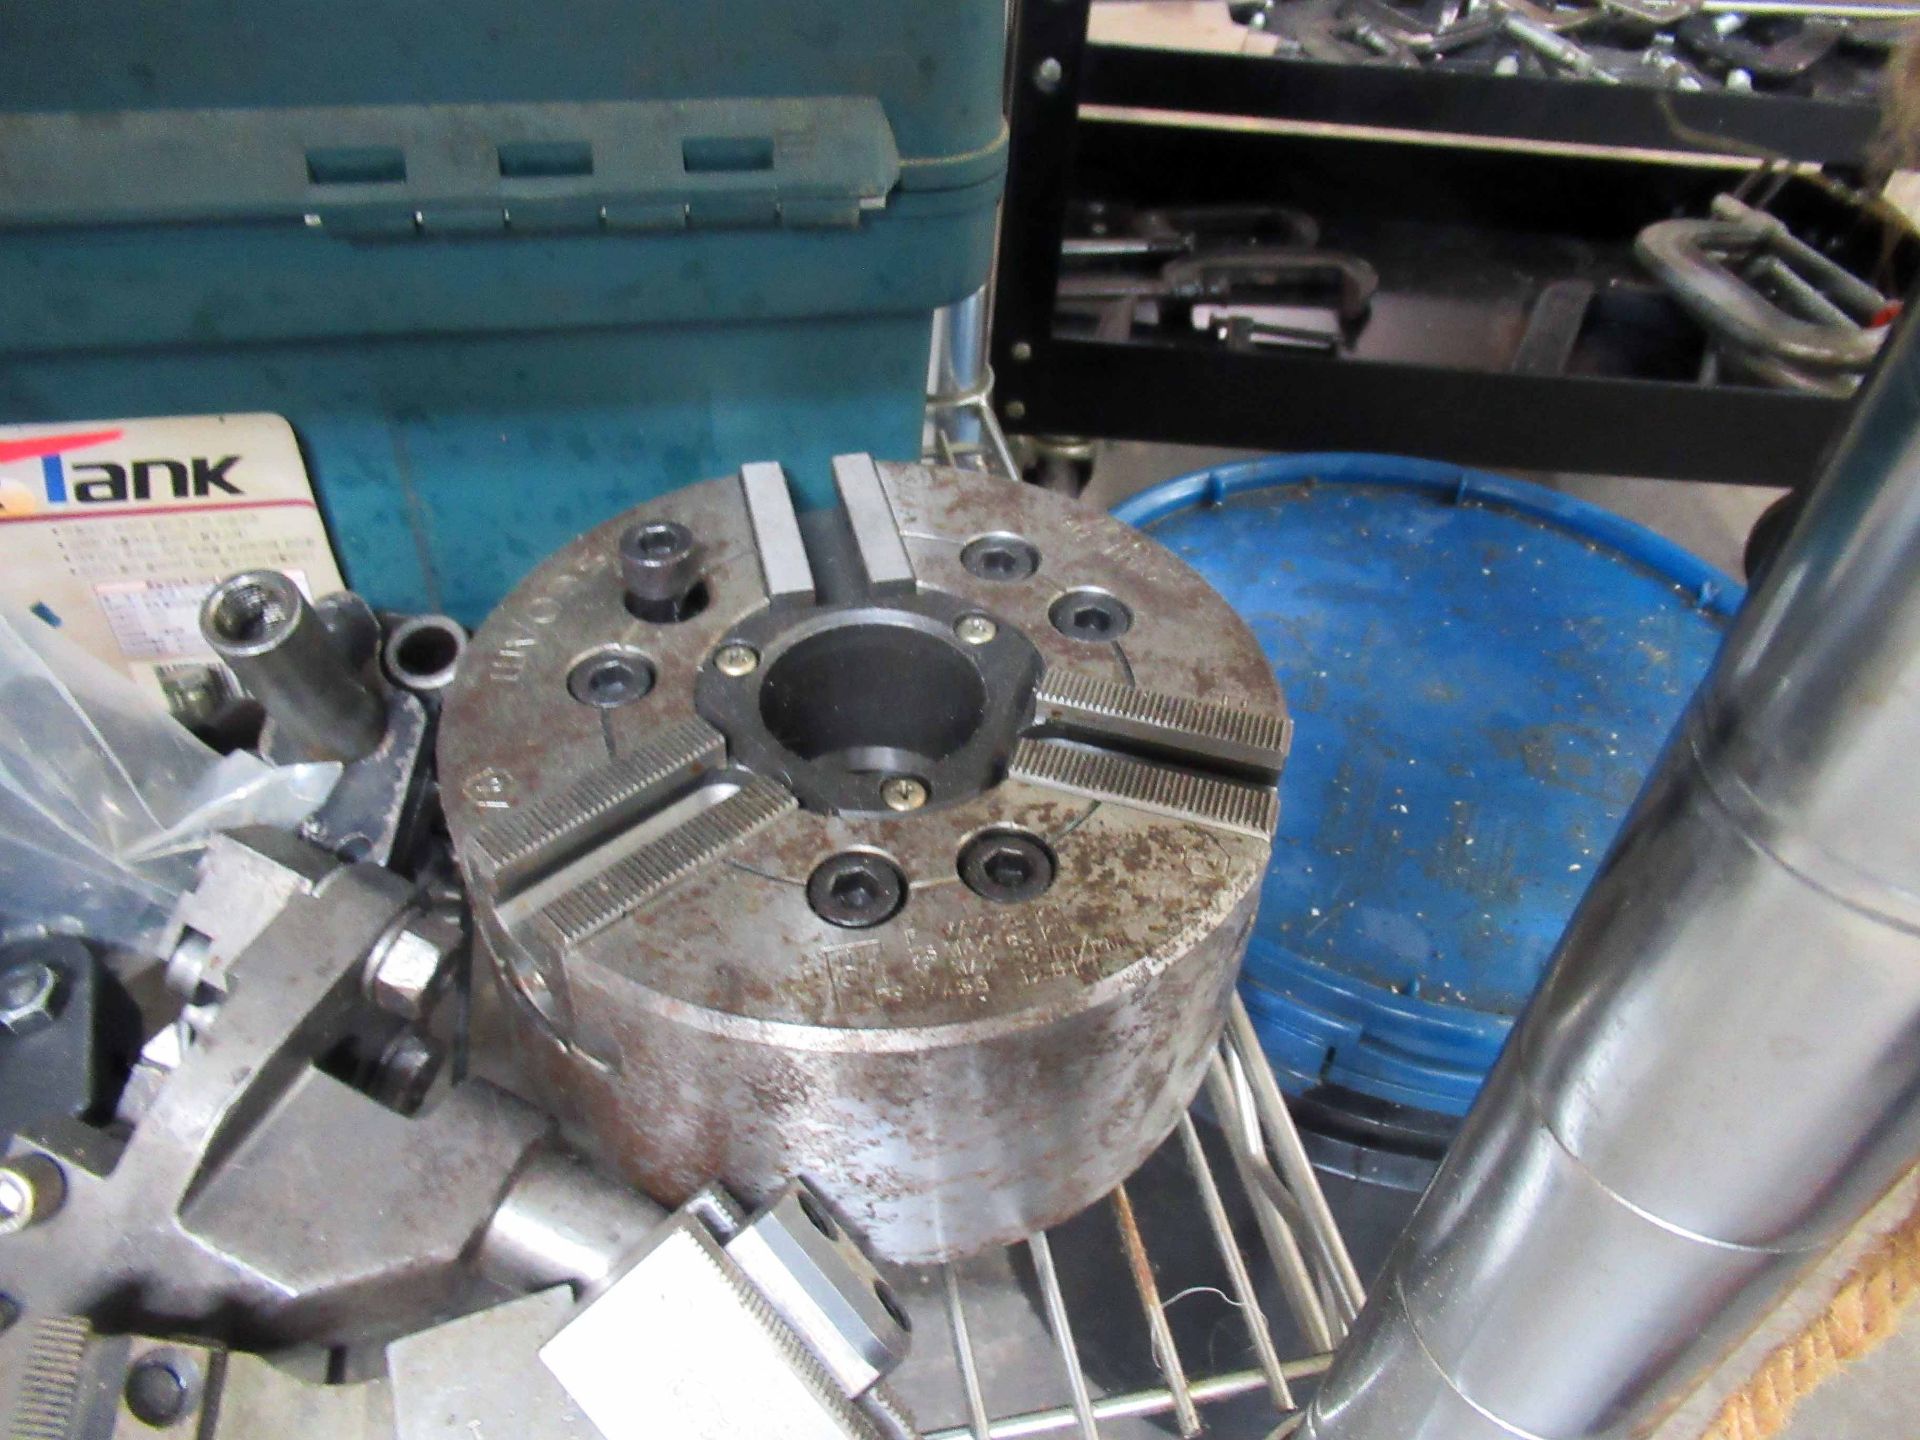 CNC LATHE, HYUNDAI WIA MDL. KIT-400, new 2012, Fanuc i Series control, collet chuck, 6-station - Image 9 of 12